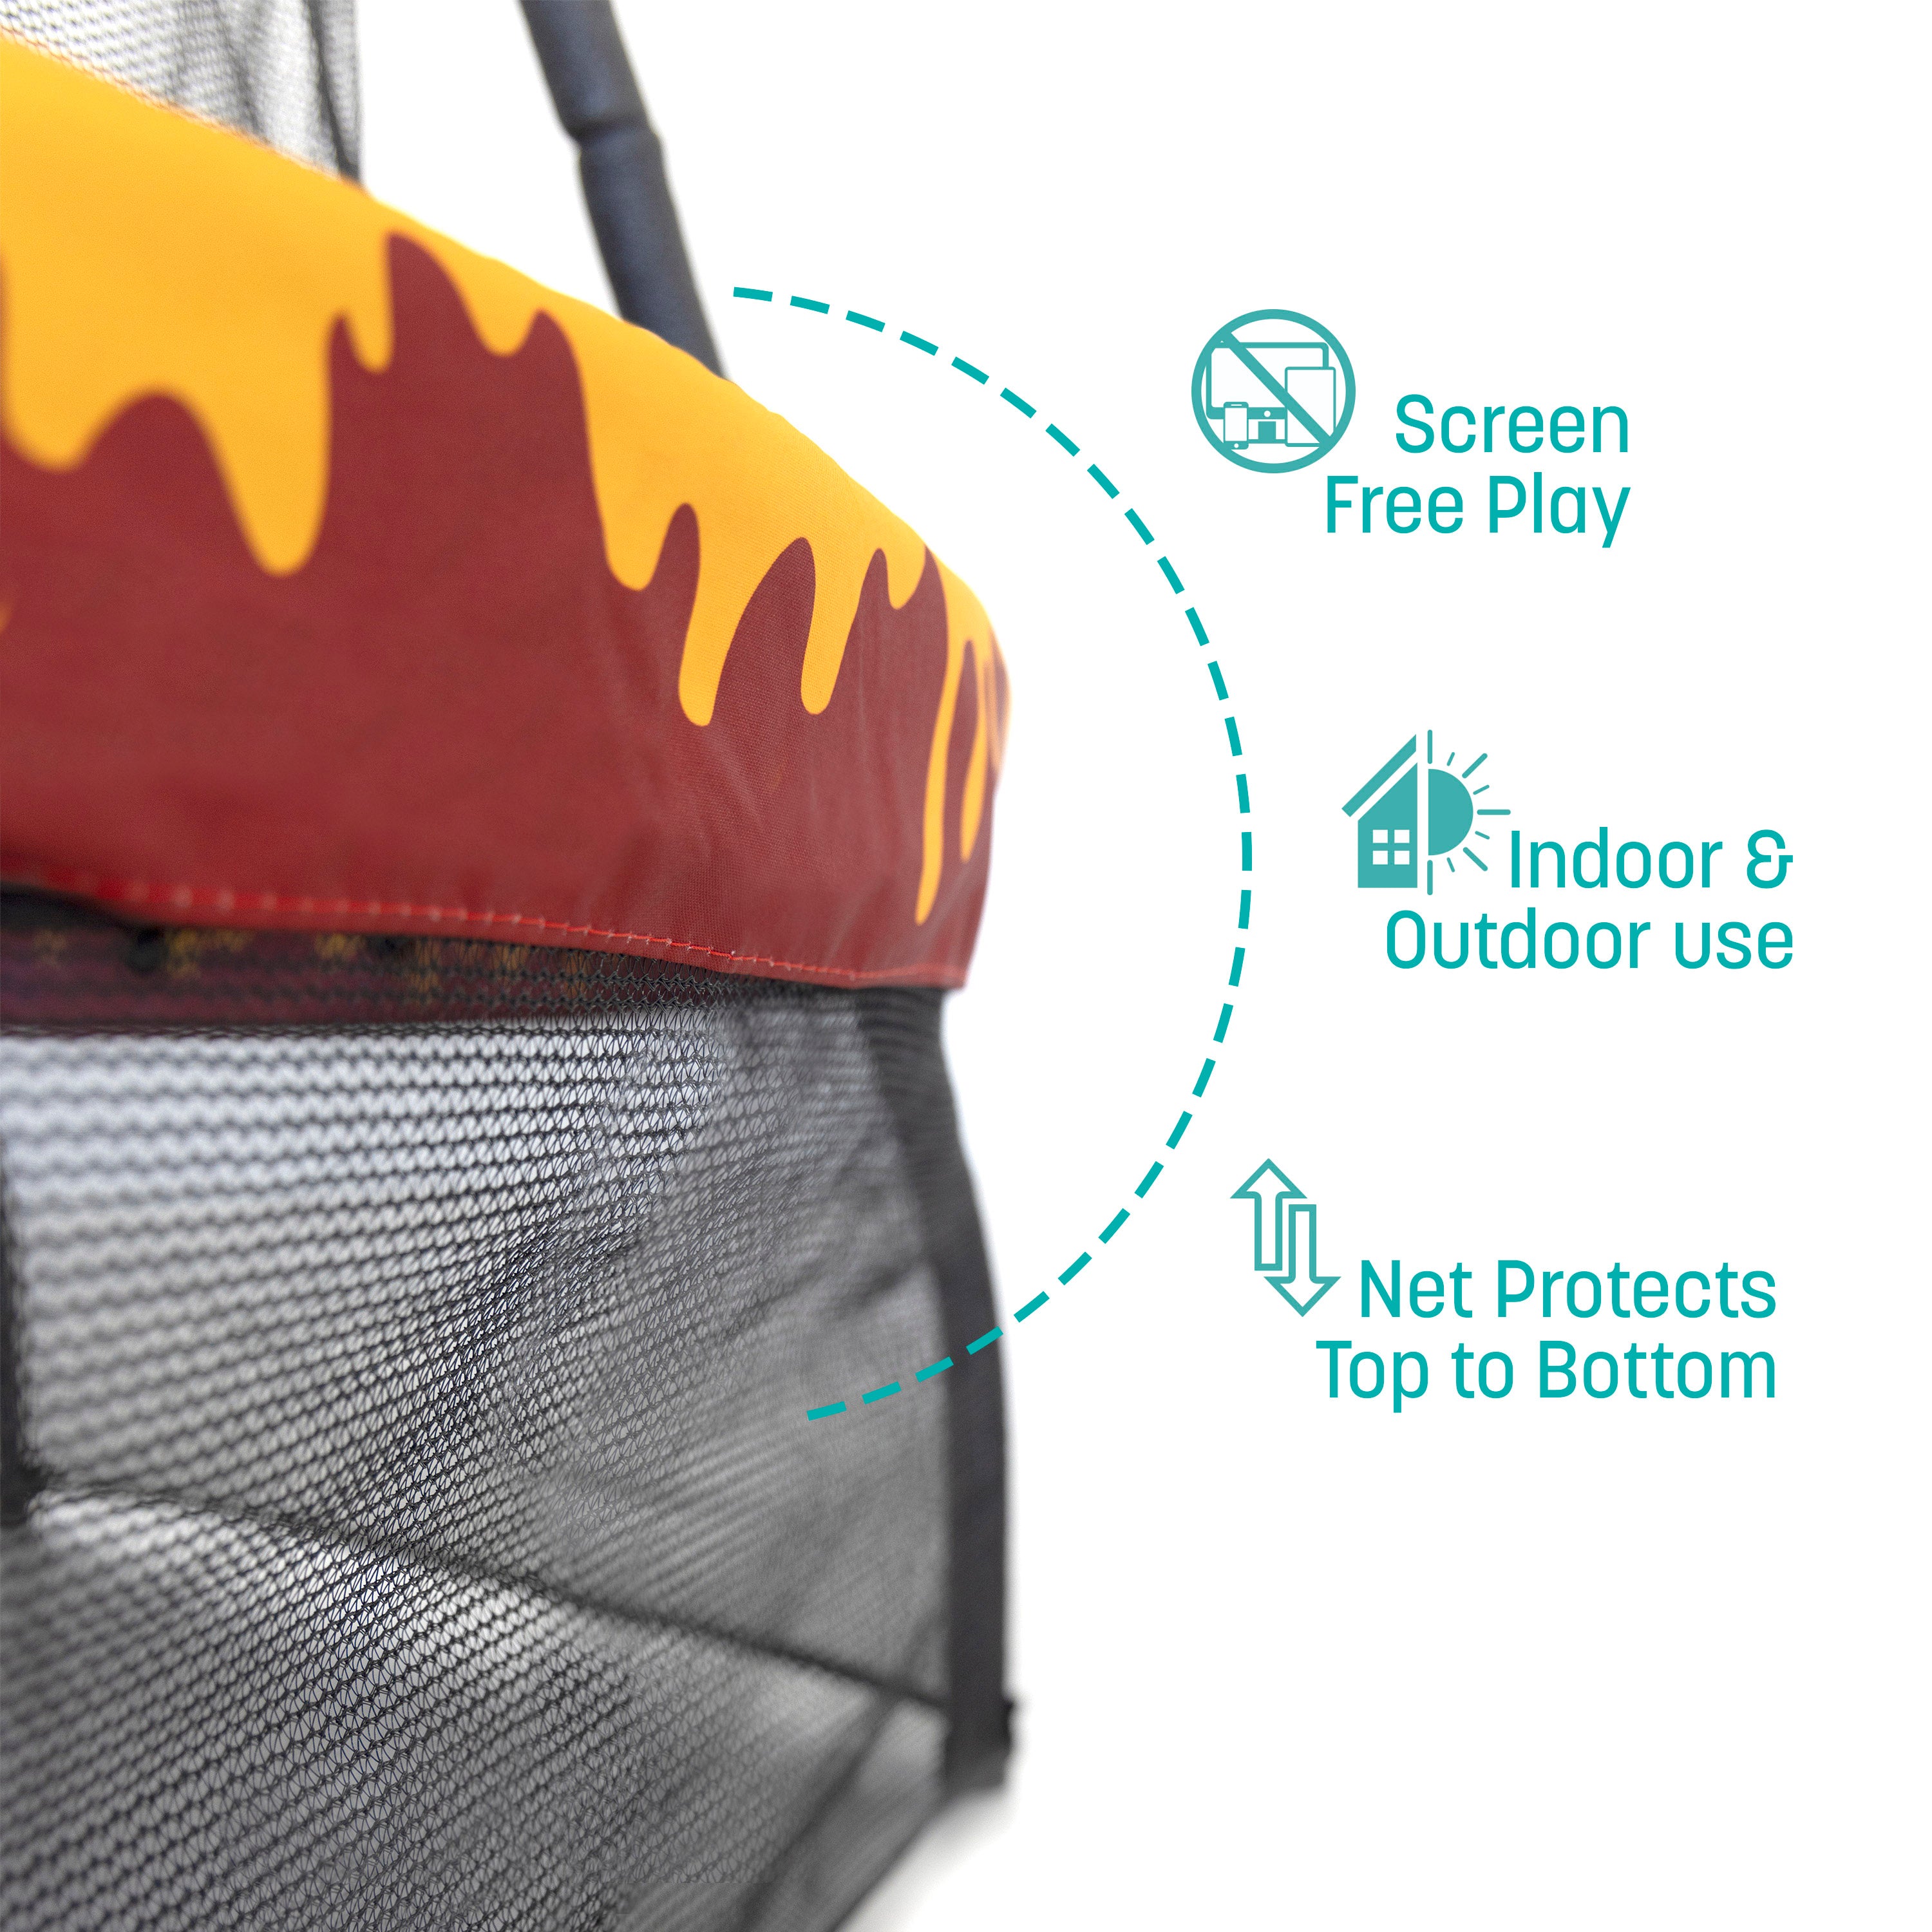 The lower enclosure net hangs below the red and yellow frame pad. Three teal callout features state, “Screen Free Play, Indoor & Outdoor Use, Net Protects Top to Bottom”. 